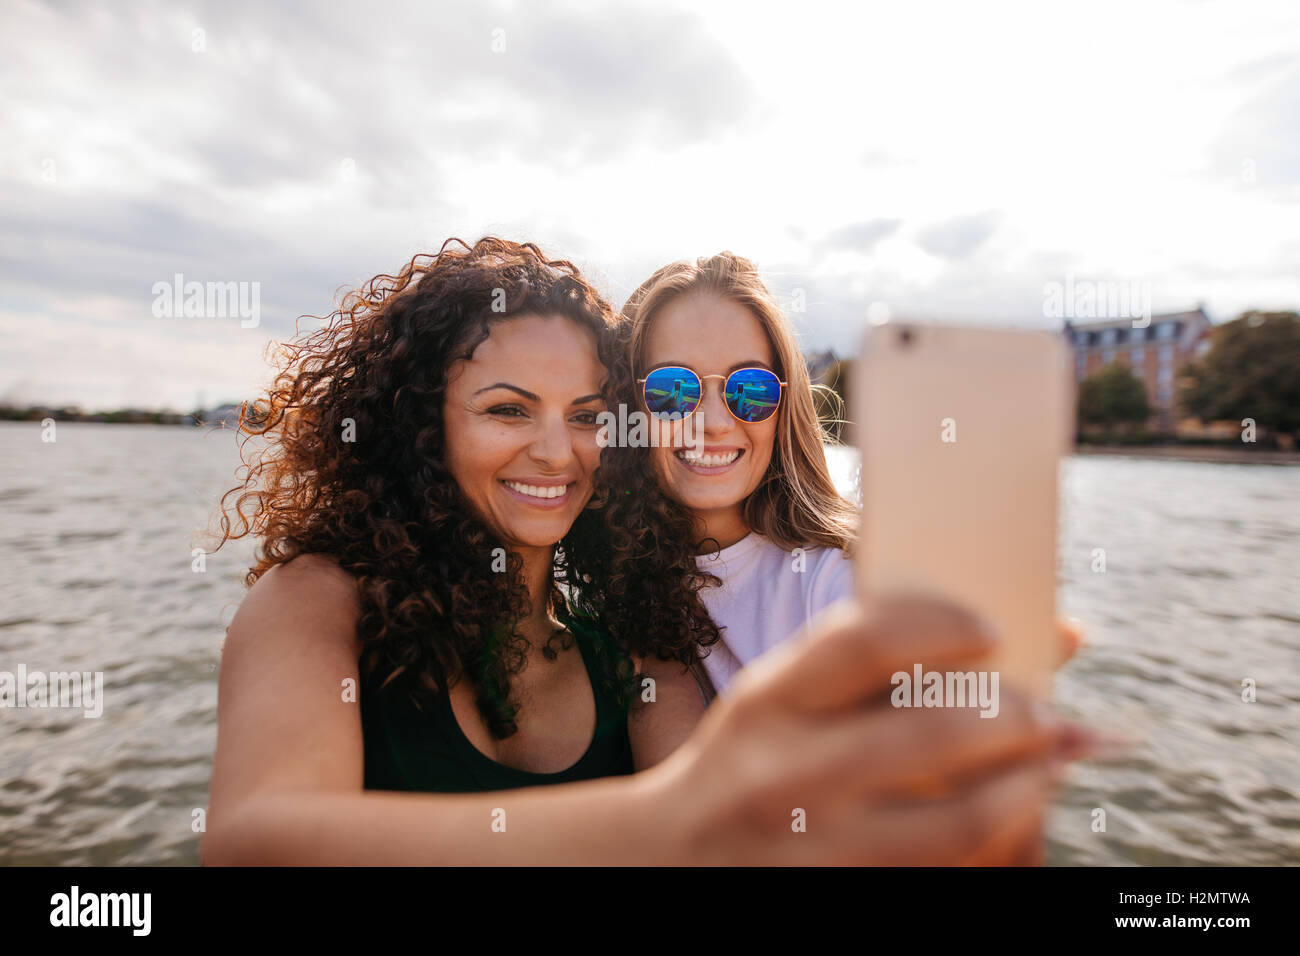 Shot of attractive young women smiling and taking selfie with mobile phone by the lake. Female friends taking self portrait with Stock Photo